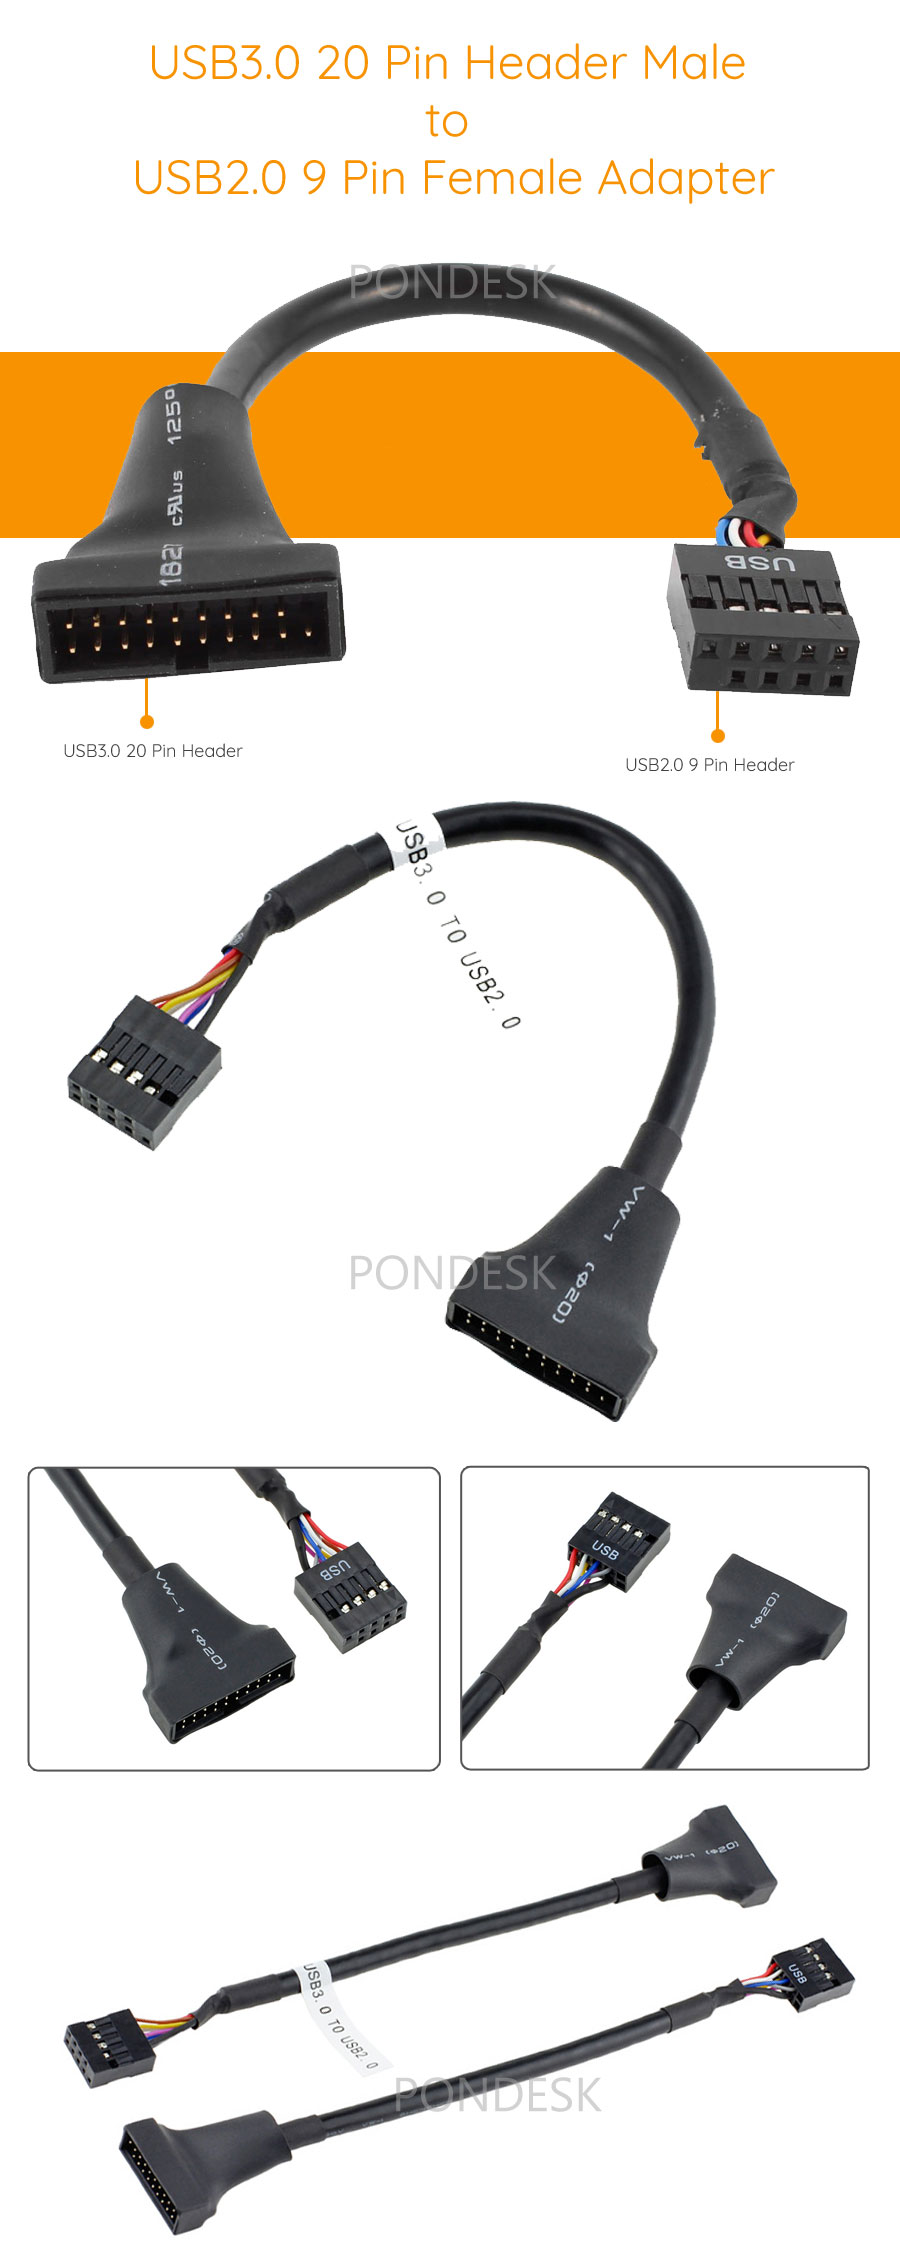 USB3.0 20 Pin Header Male to USB2.0 9 Pin Female Adapter - ABHO-009 | Image